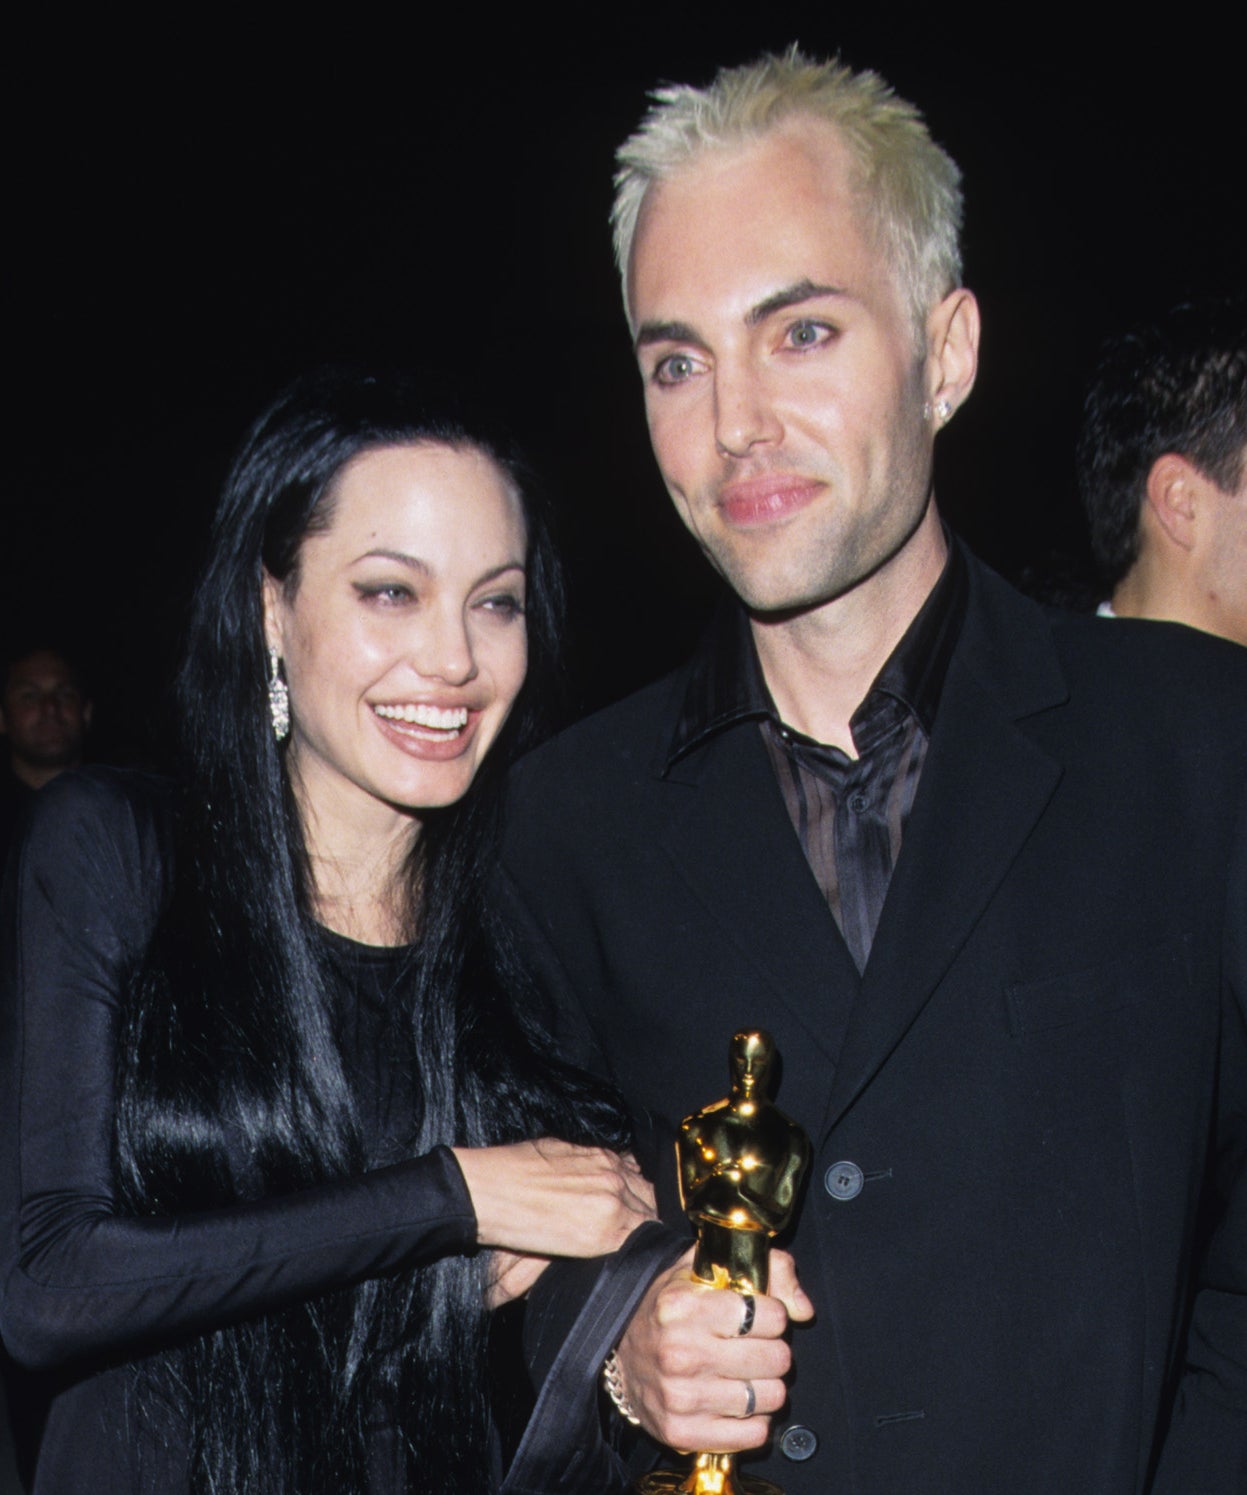 Close-up of Angie and James smiling, with James holding an Oscar